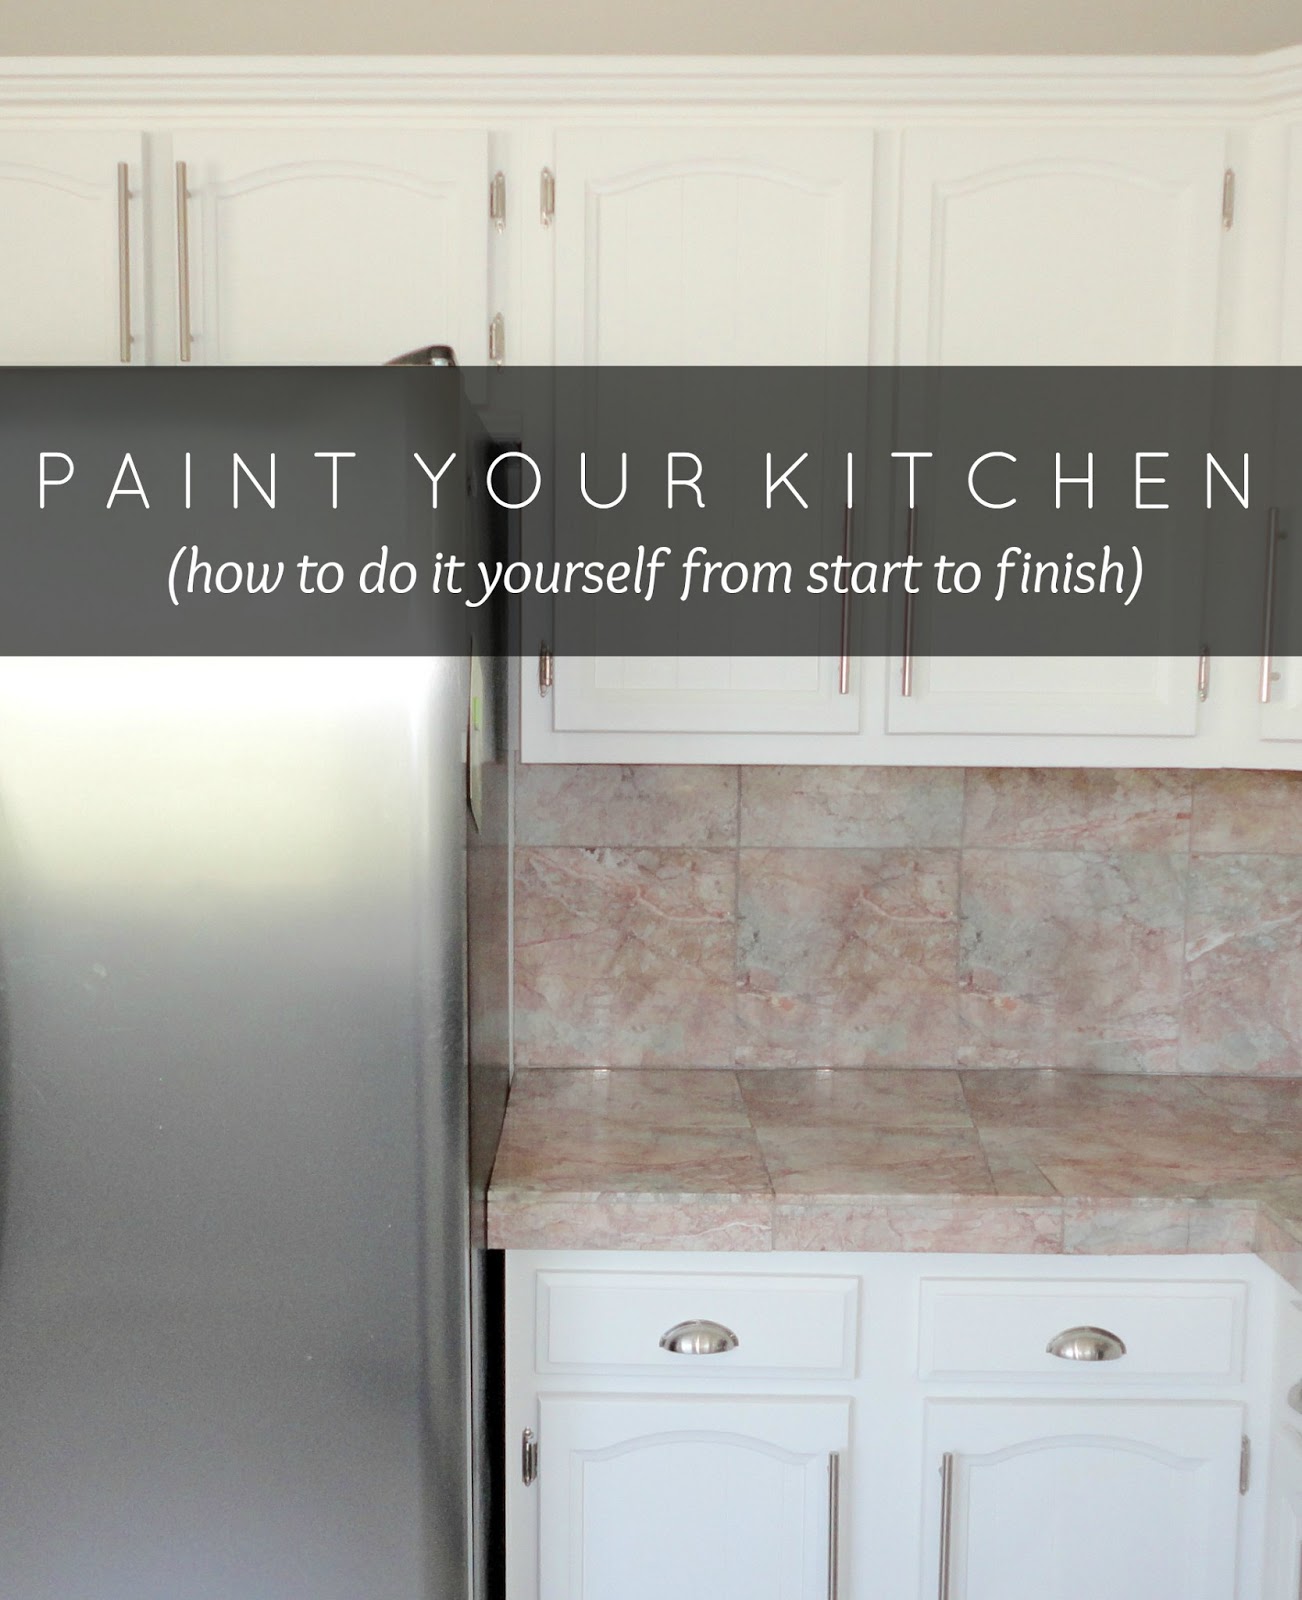 LiveLoveDIY How To Paint Kitchen Cabinets In 10 Easy Steps